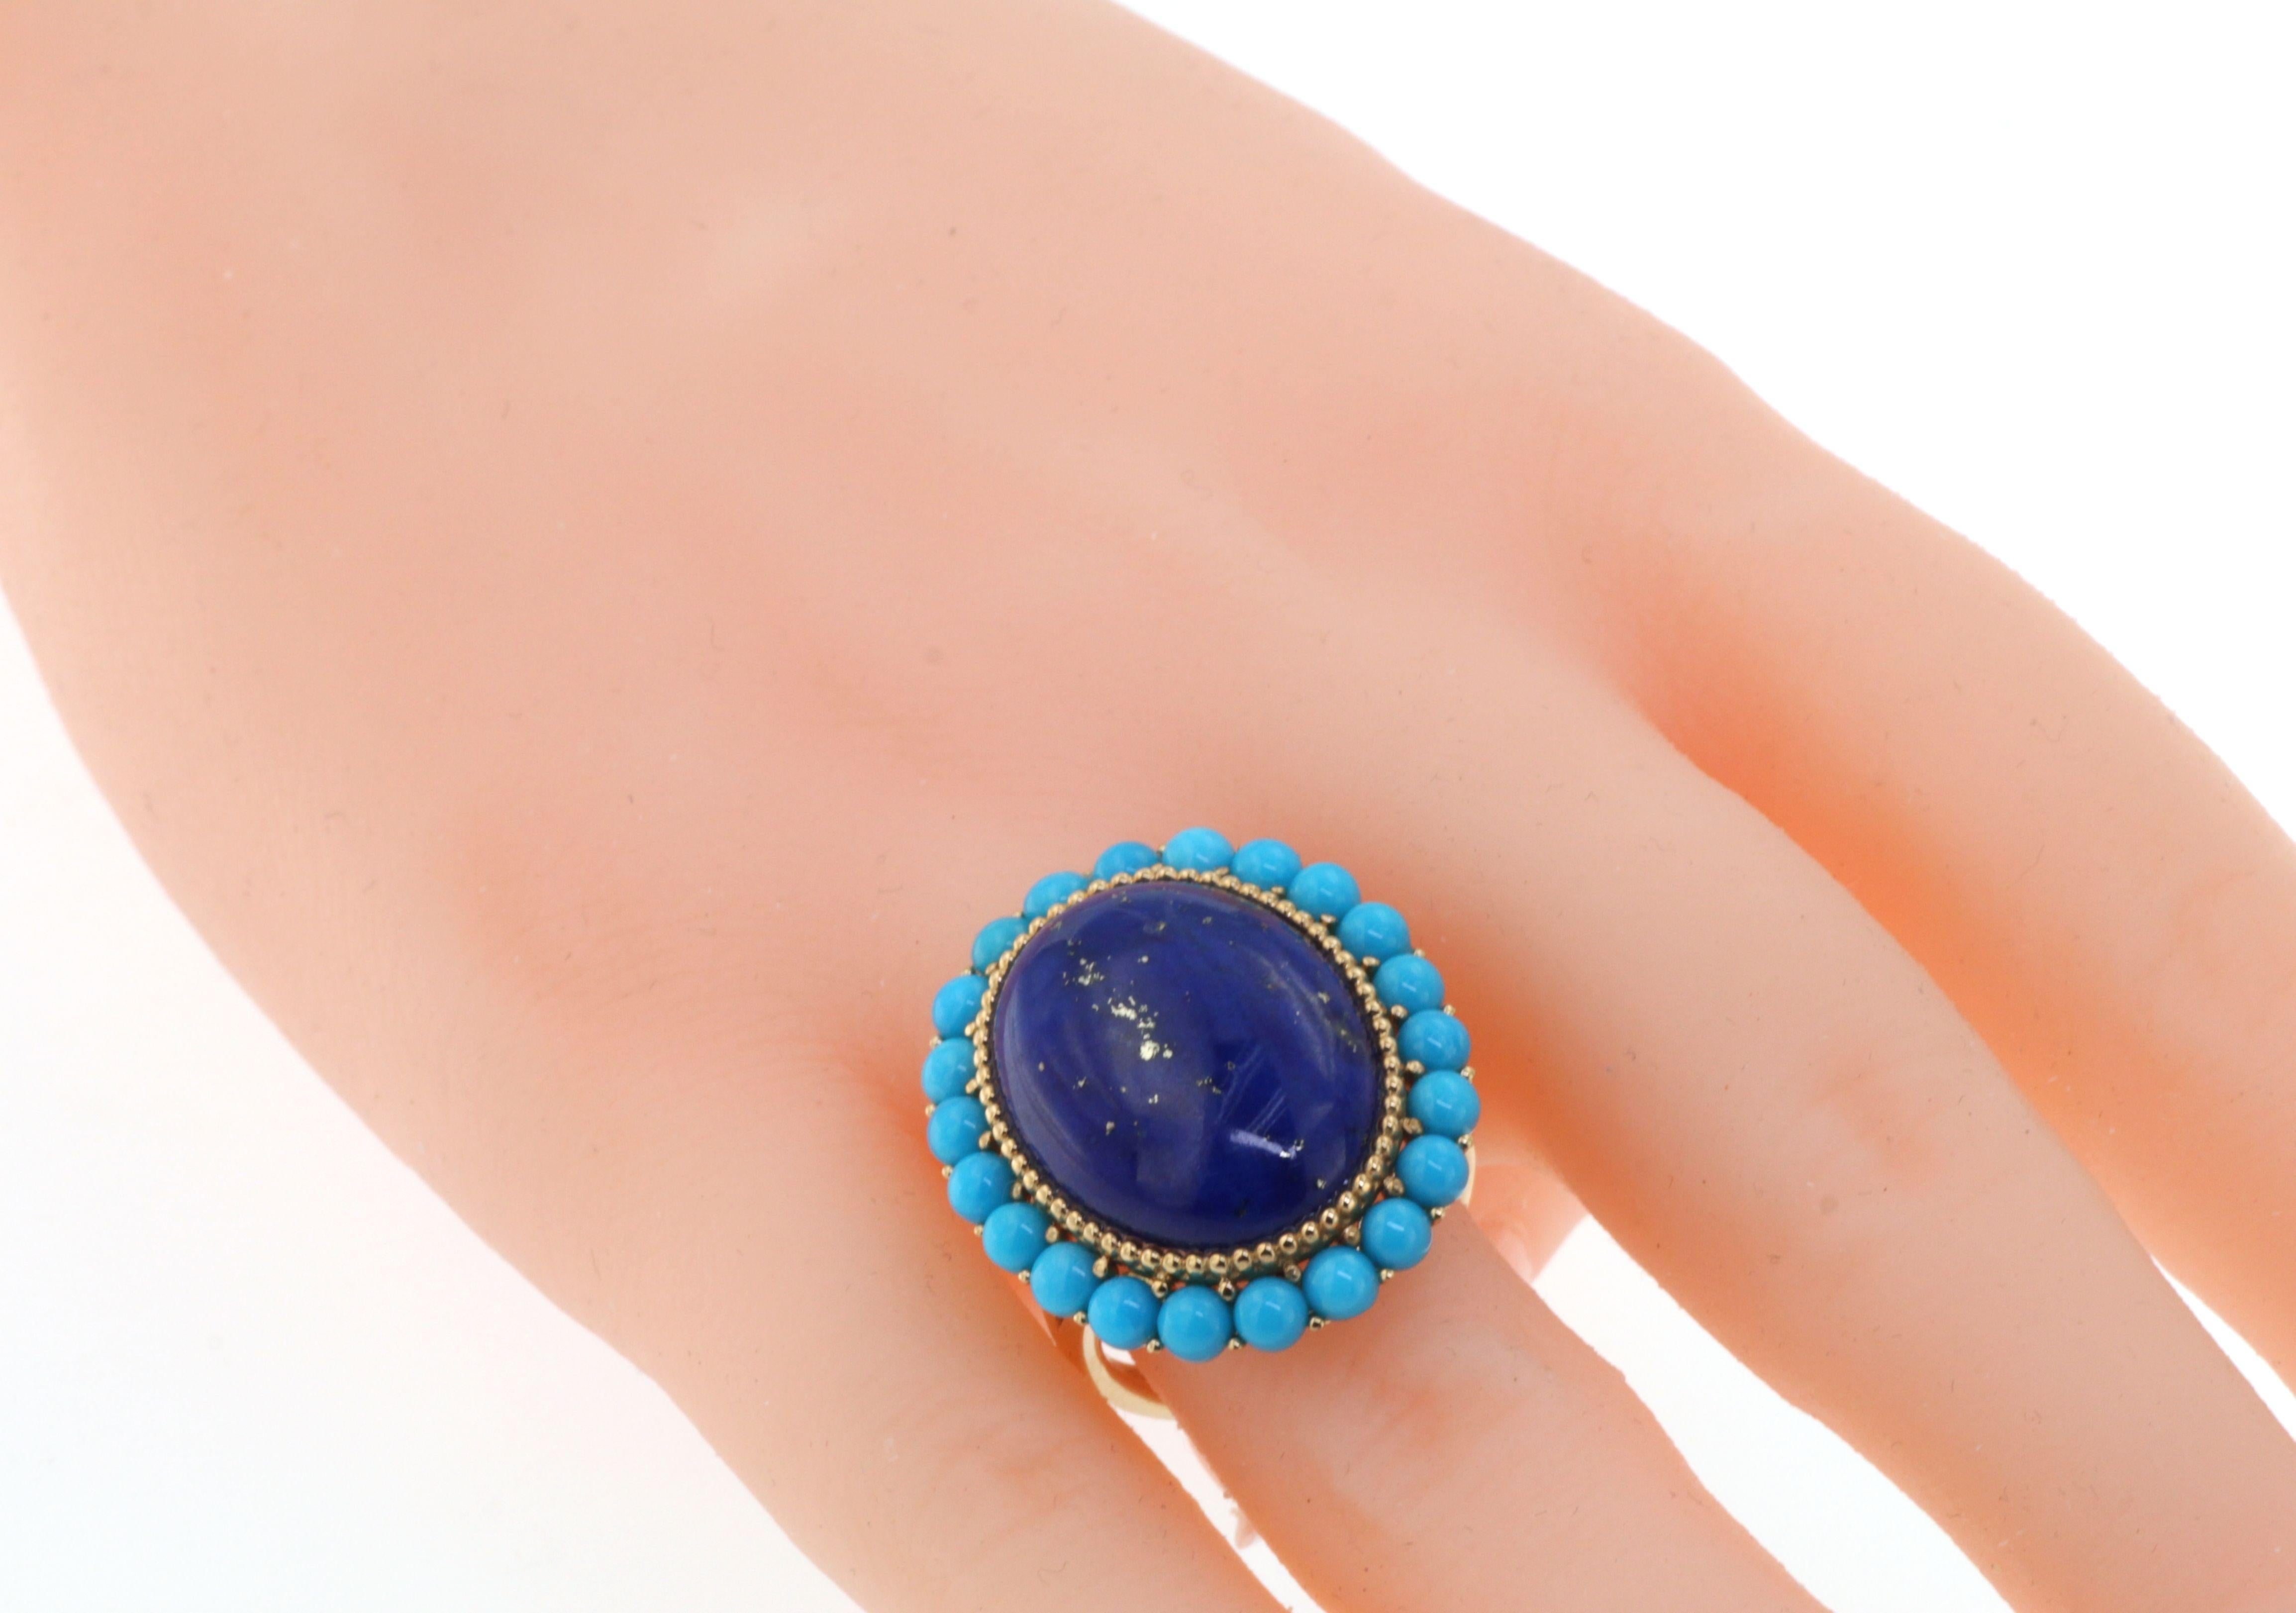 This ring features a 11.80 carats oval shape lapis lazuli.  Lapis Lazuli is surrounded by gold beads and 0.63 carats of round turquoise. Ring is set in 14 karat yellow gold. Matching earrings are available, please visit our store-front to view